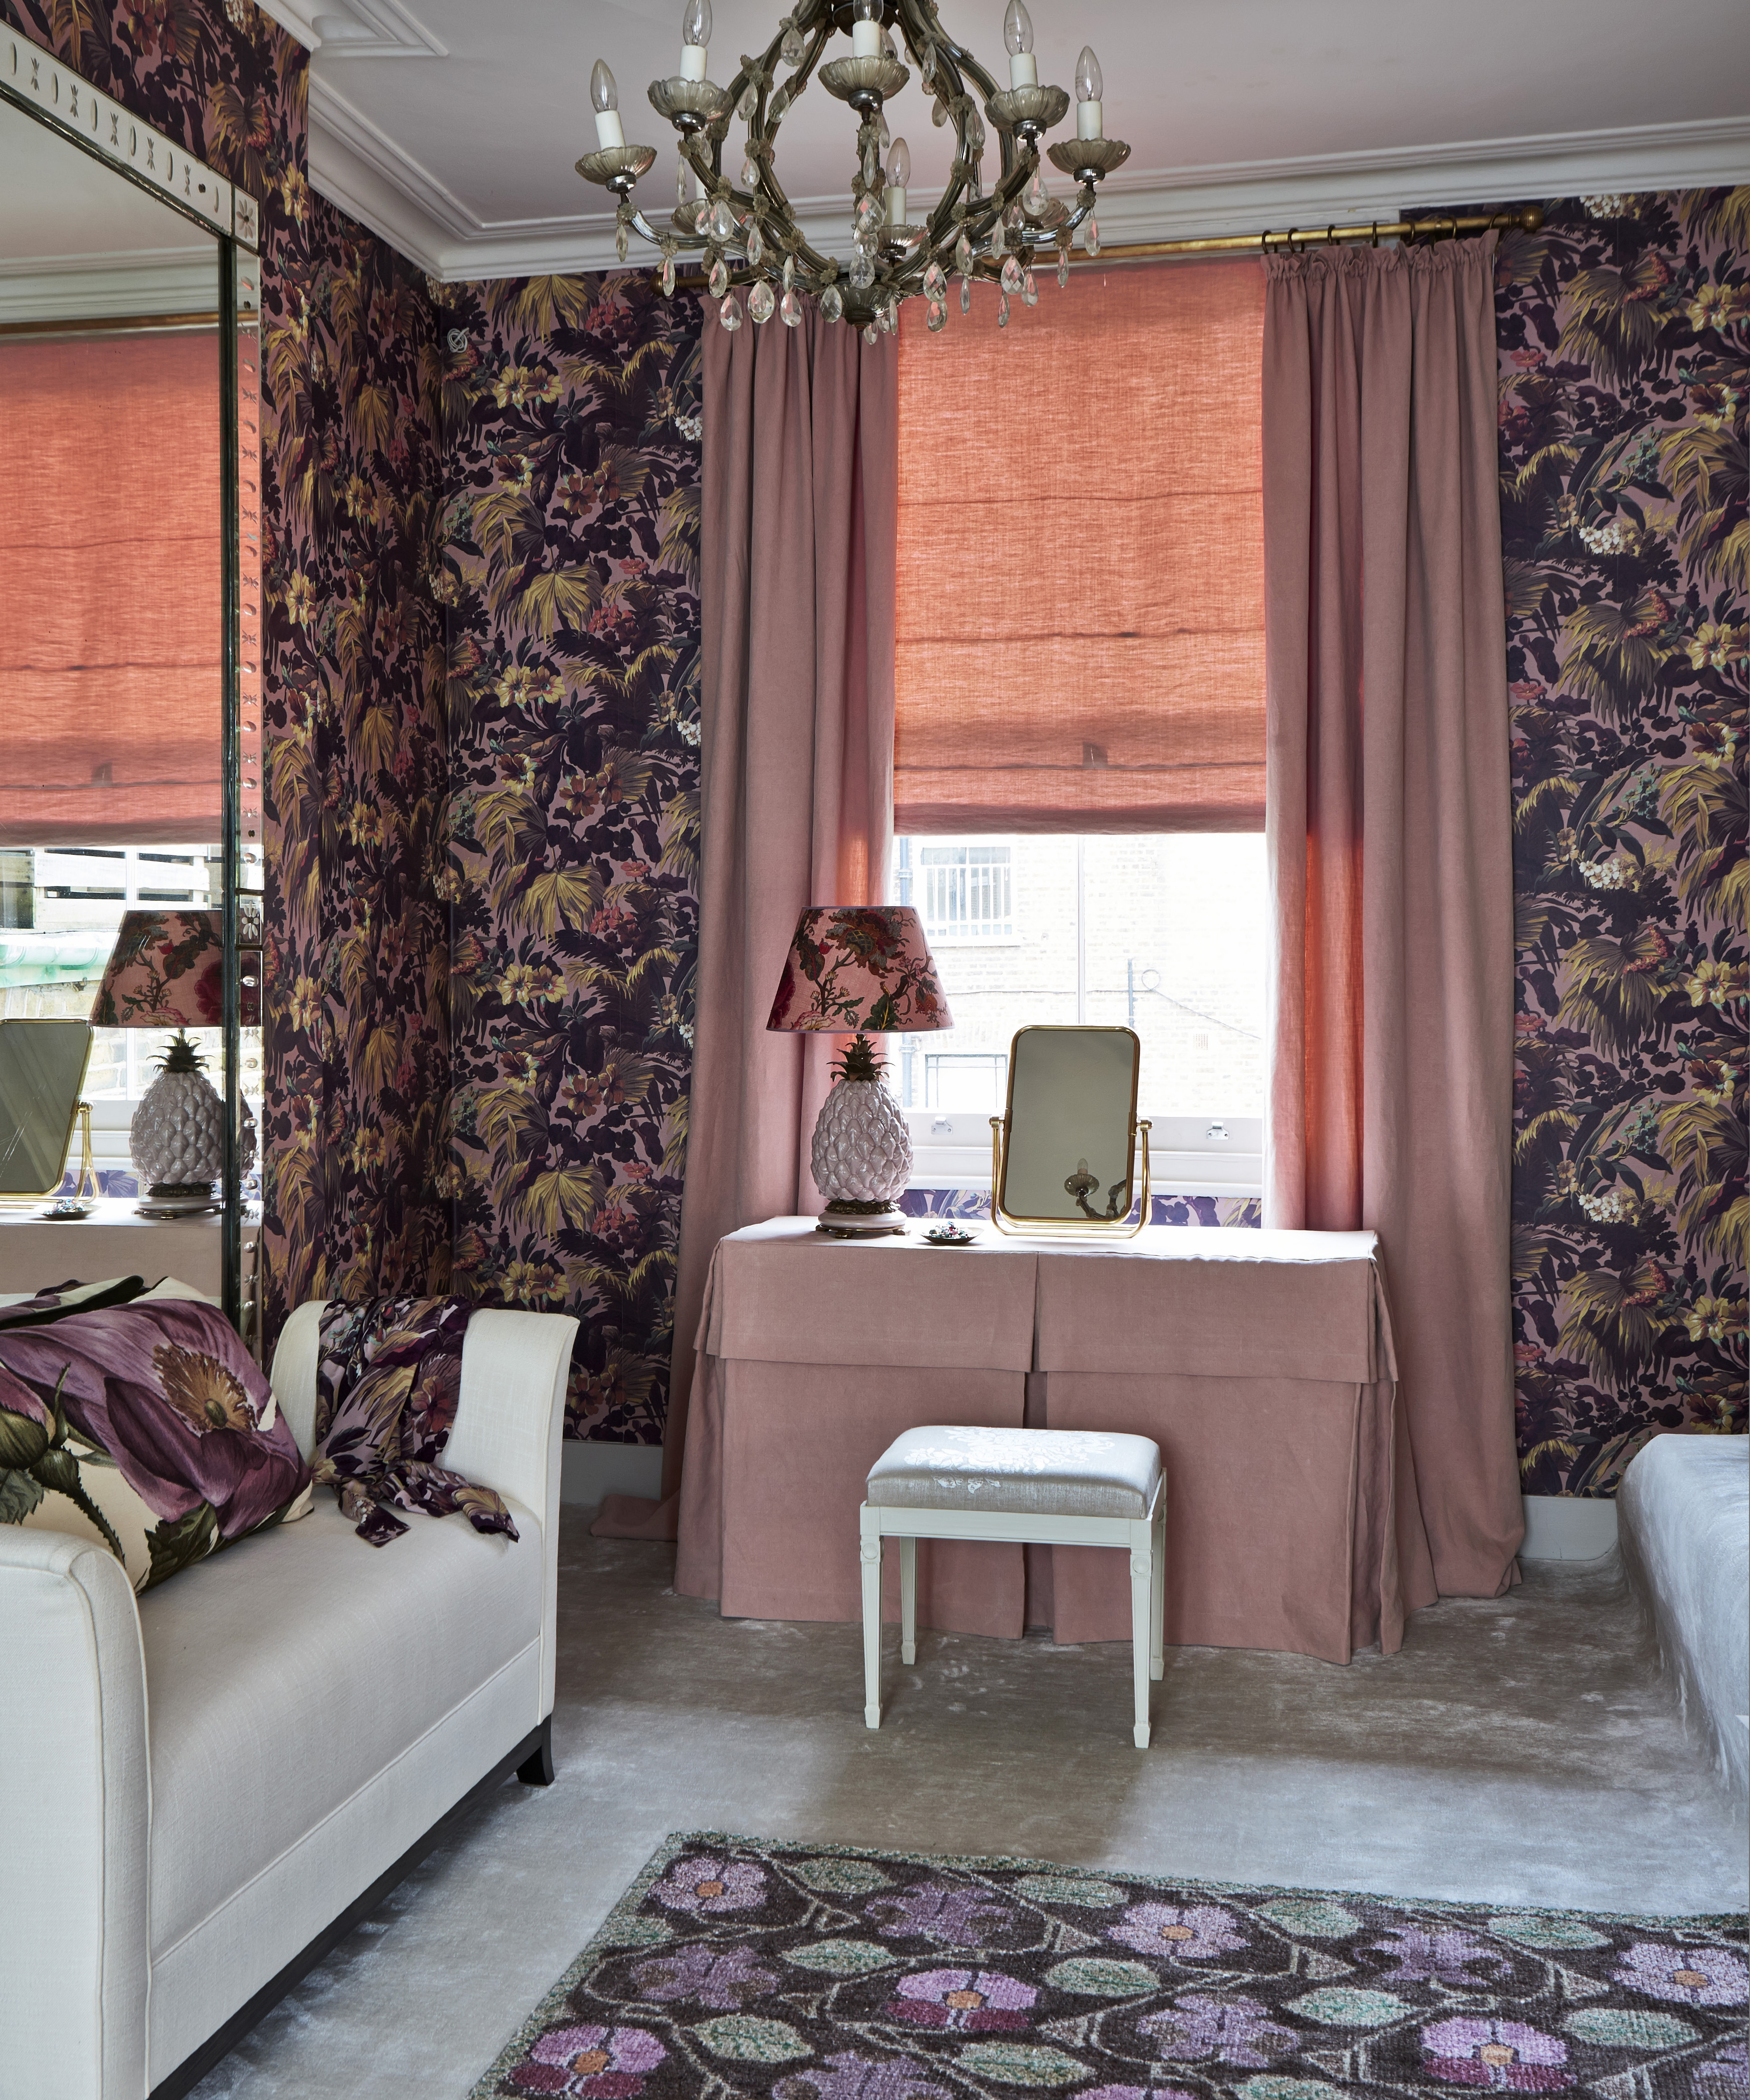 A dark purple and pink bedroom with a pink dressing table and floral wallpaper